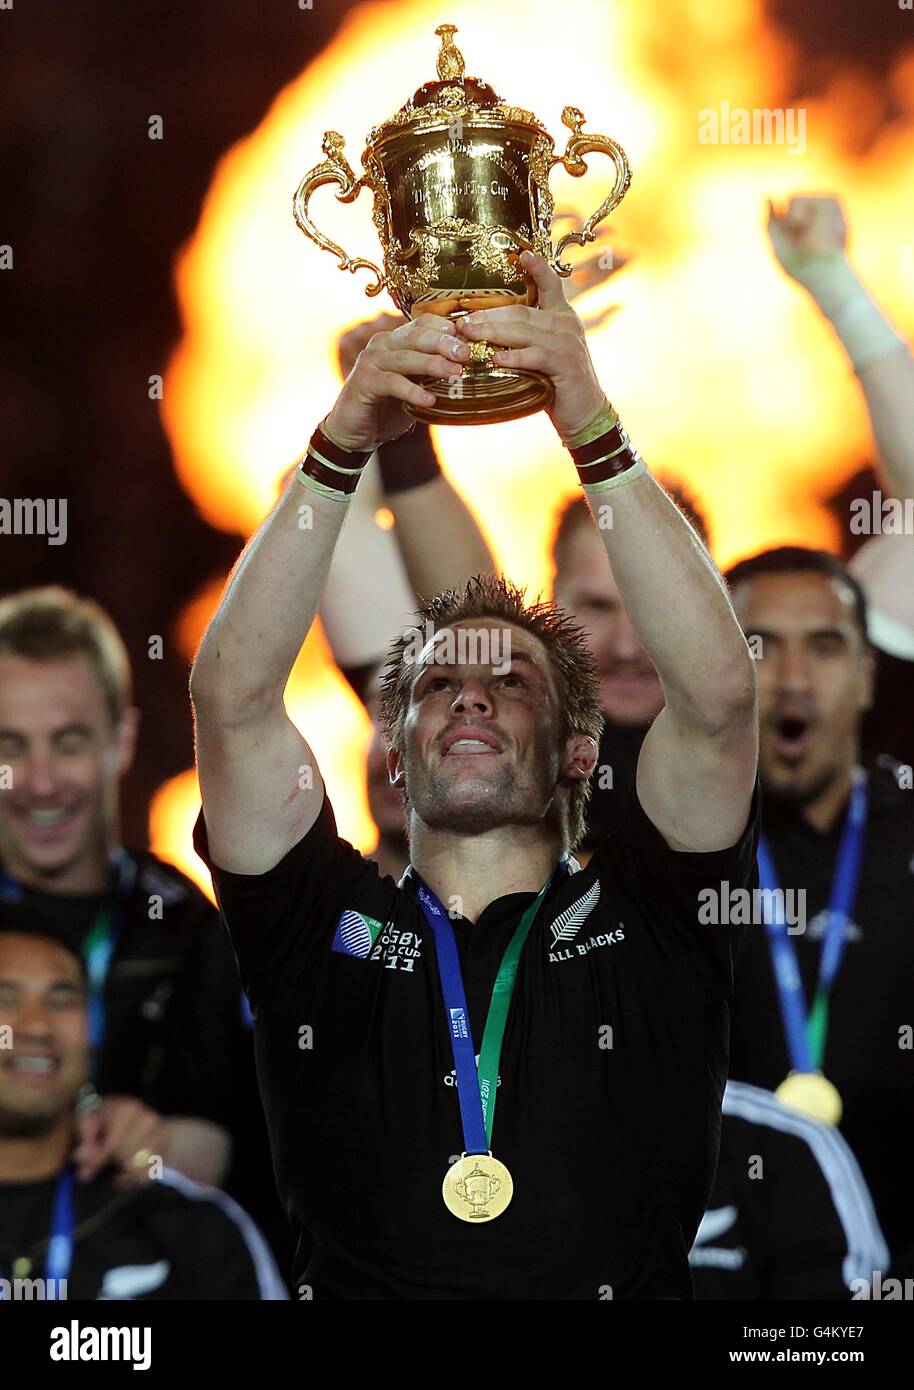 Rugby Union - Rugby World Cup 2011 - Final - France v New Zealand - Eden Park. New Zealand captain Richie McCaw lifts the Webb Ellis Cup as he celebrates winning the World Cup Final Stock Photo